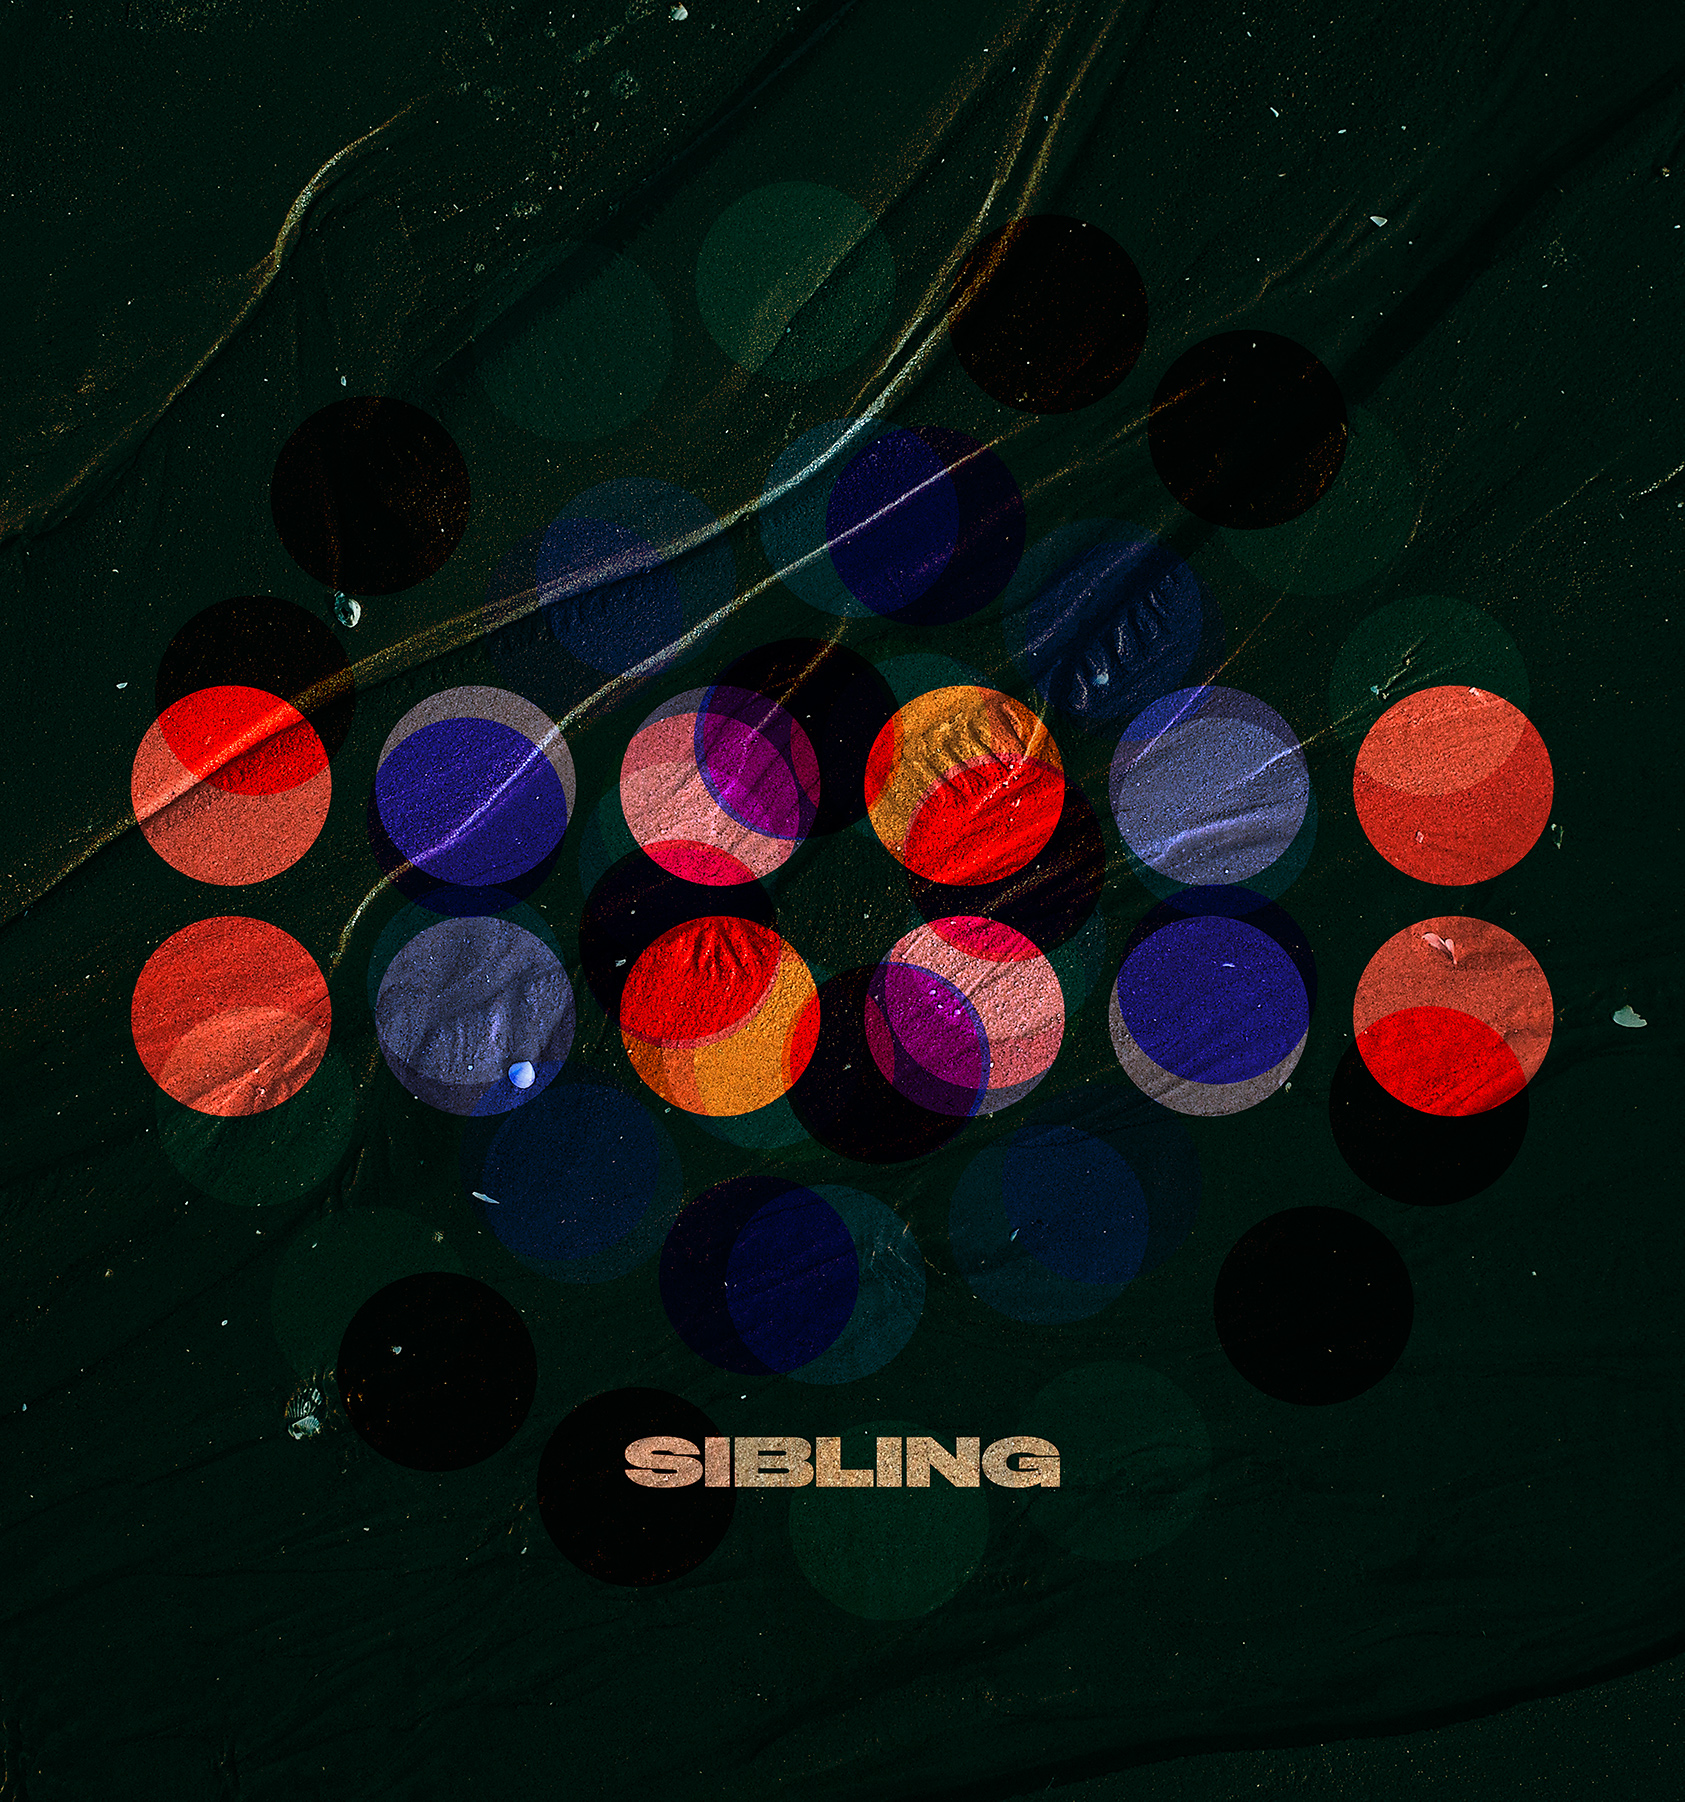 Concept album cover design for SIBLING. August 2019.